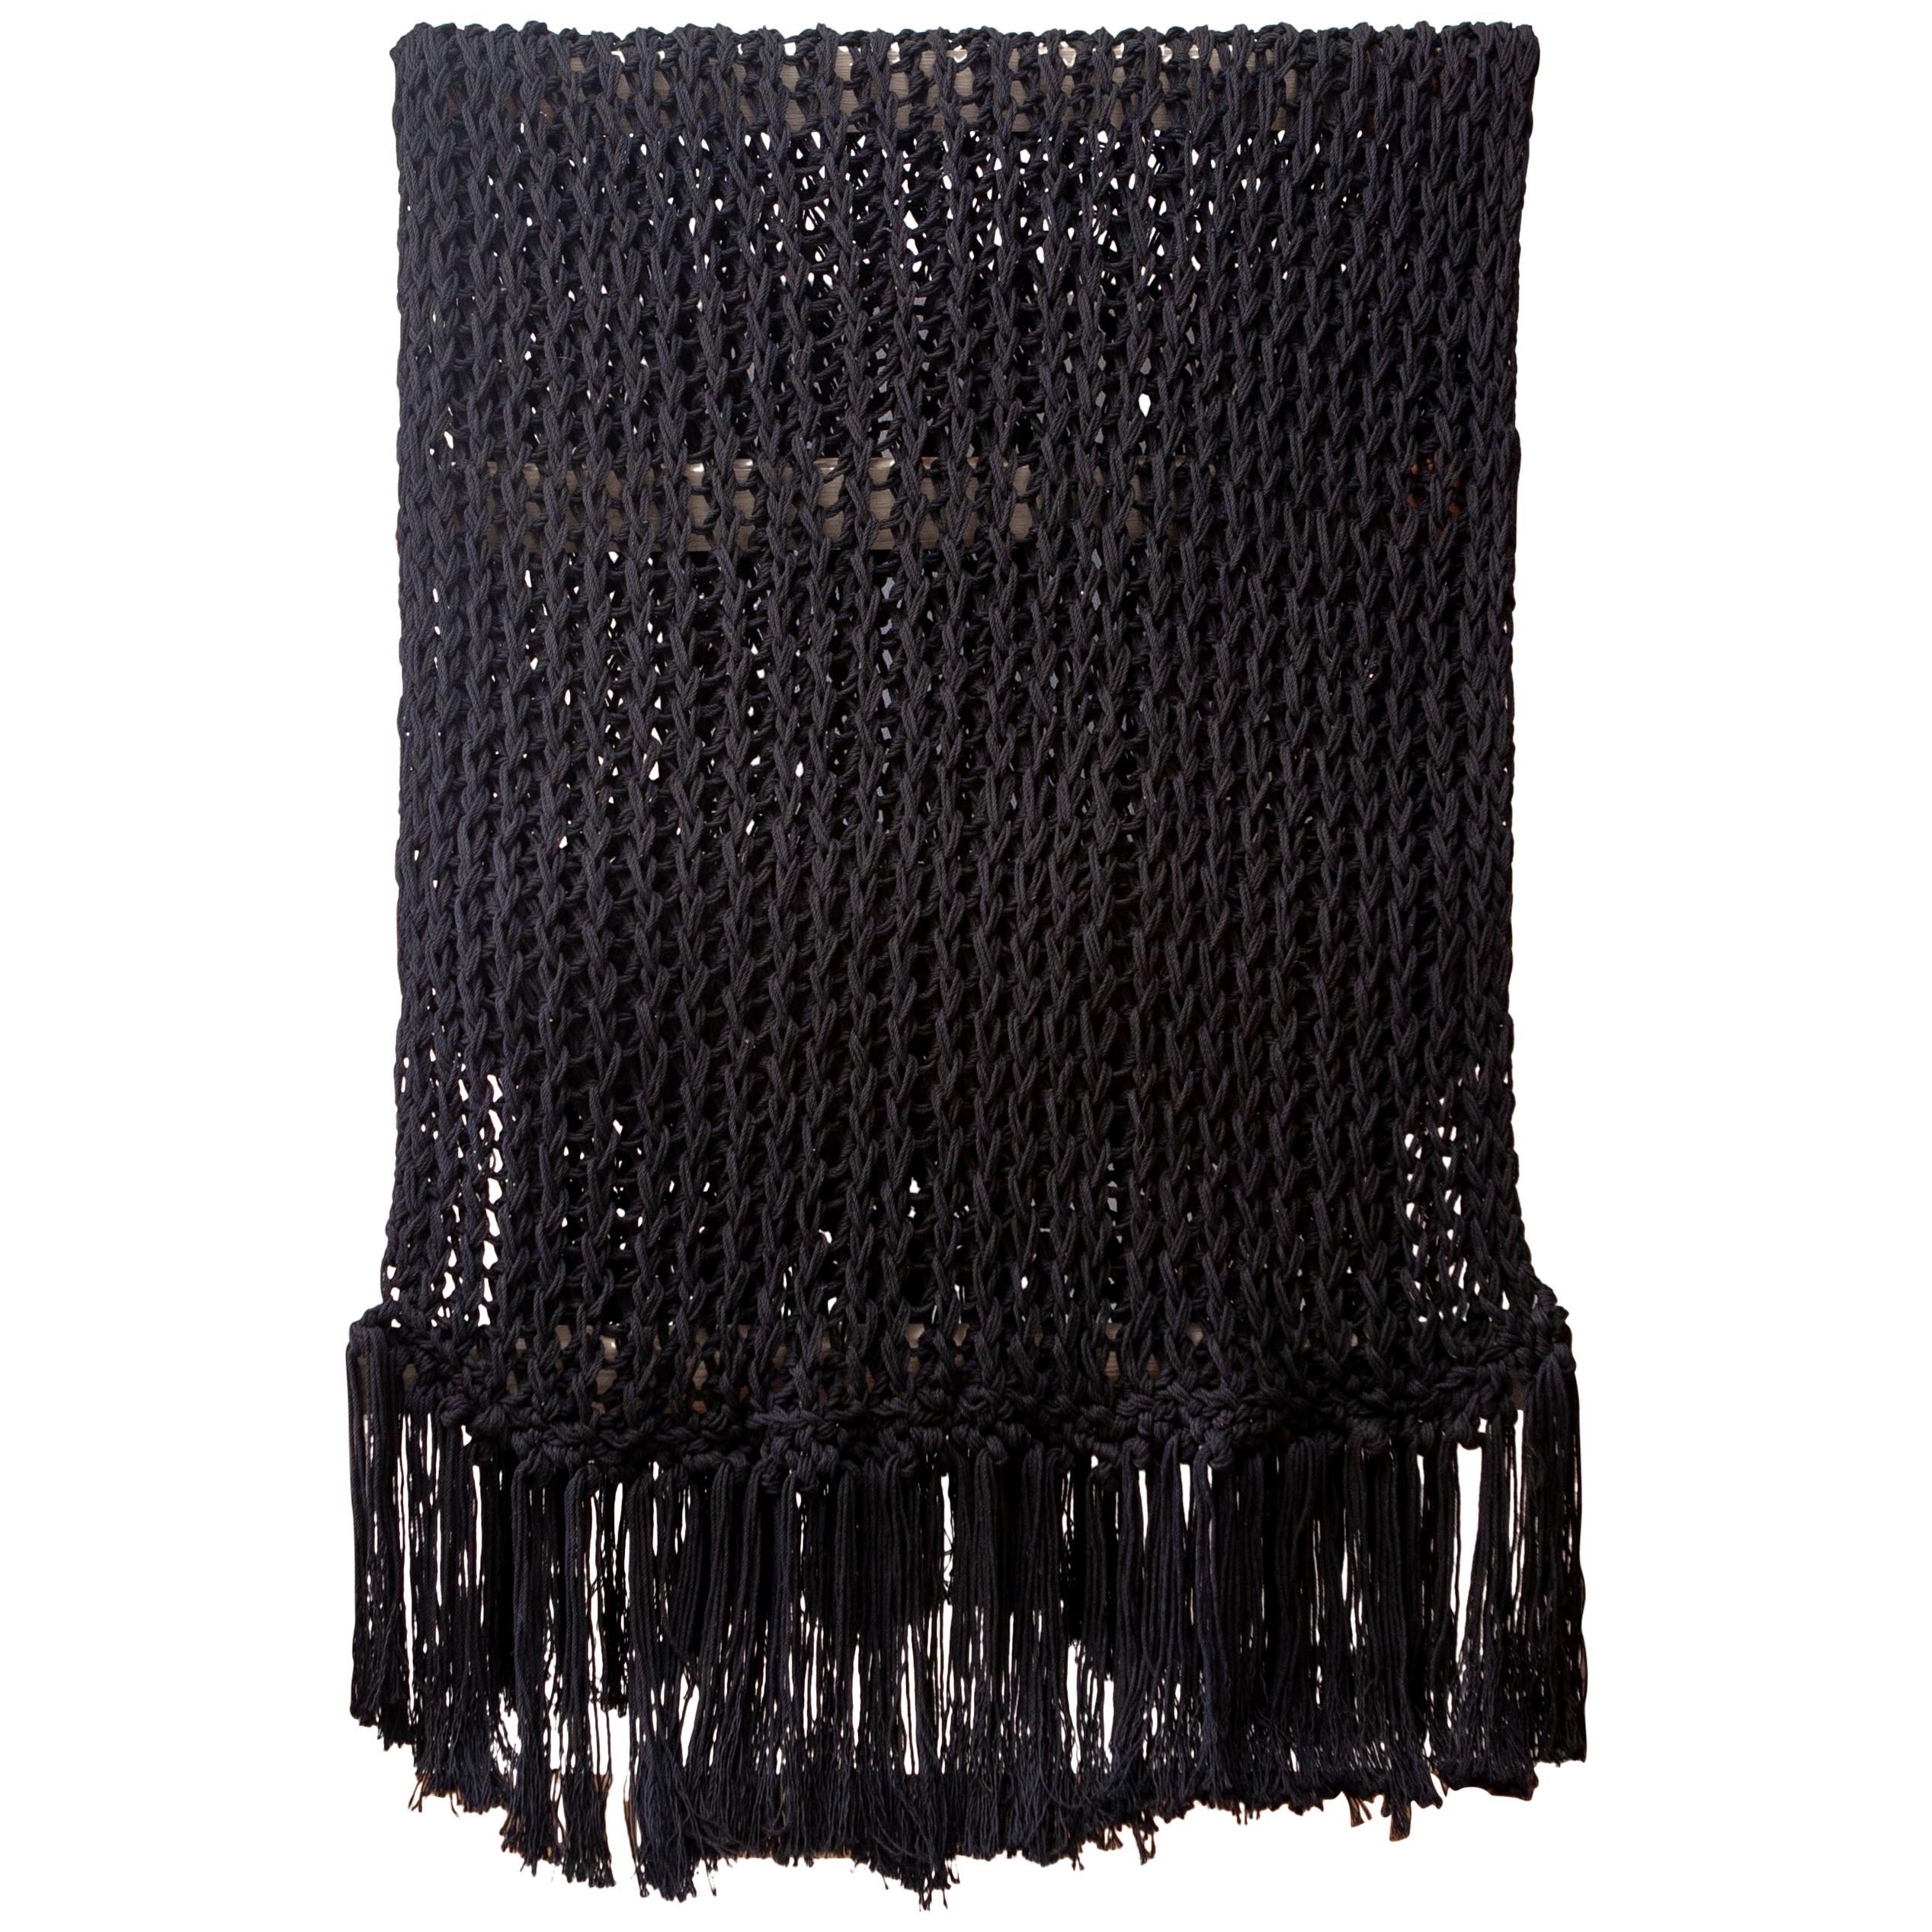 Recycled Open Weave Cotton Throw with Fringe, in Black, in Stock